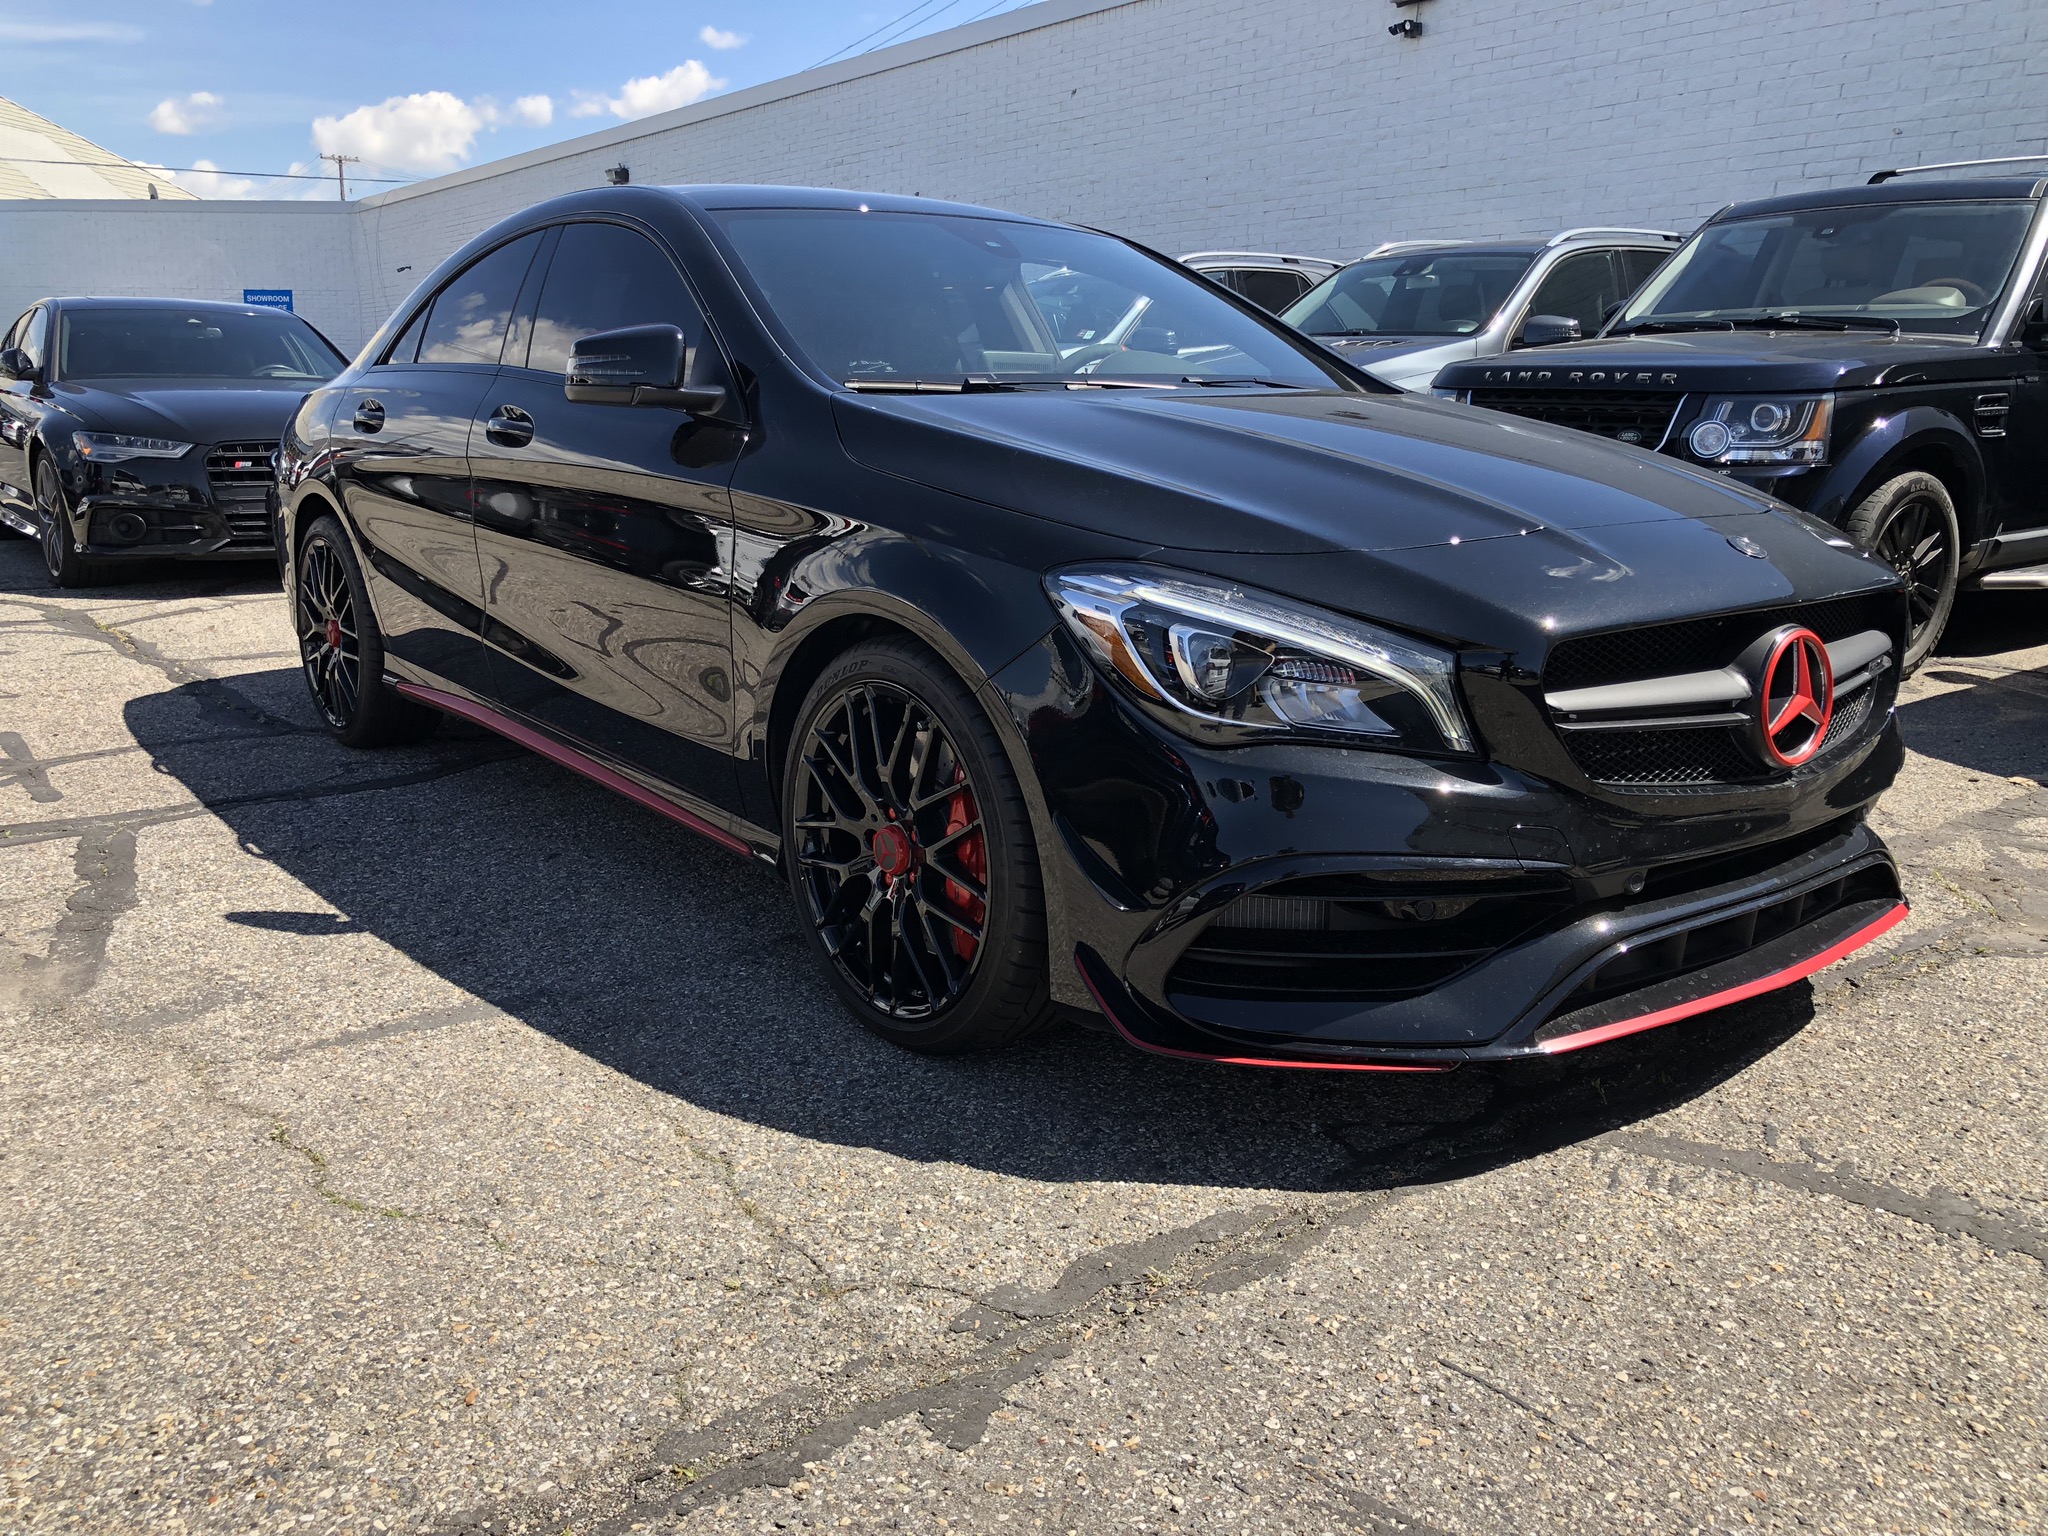 Mercedes CLA45 Gloss Black wheel painting after